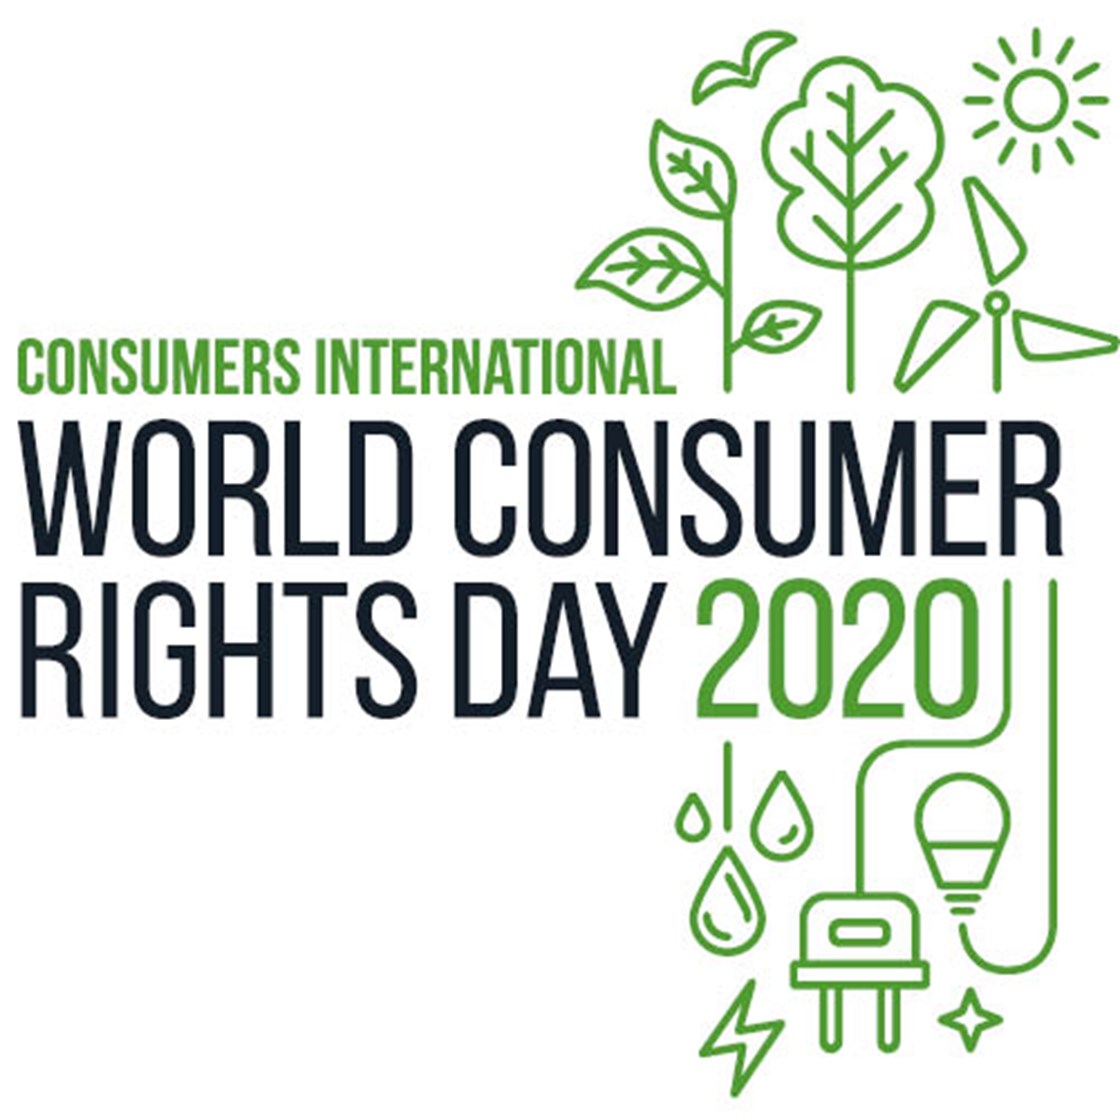 consumers rights day